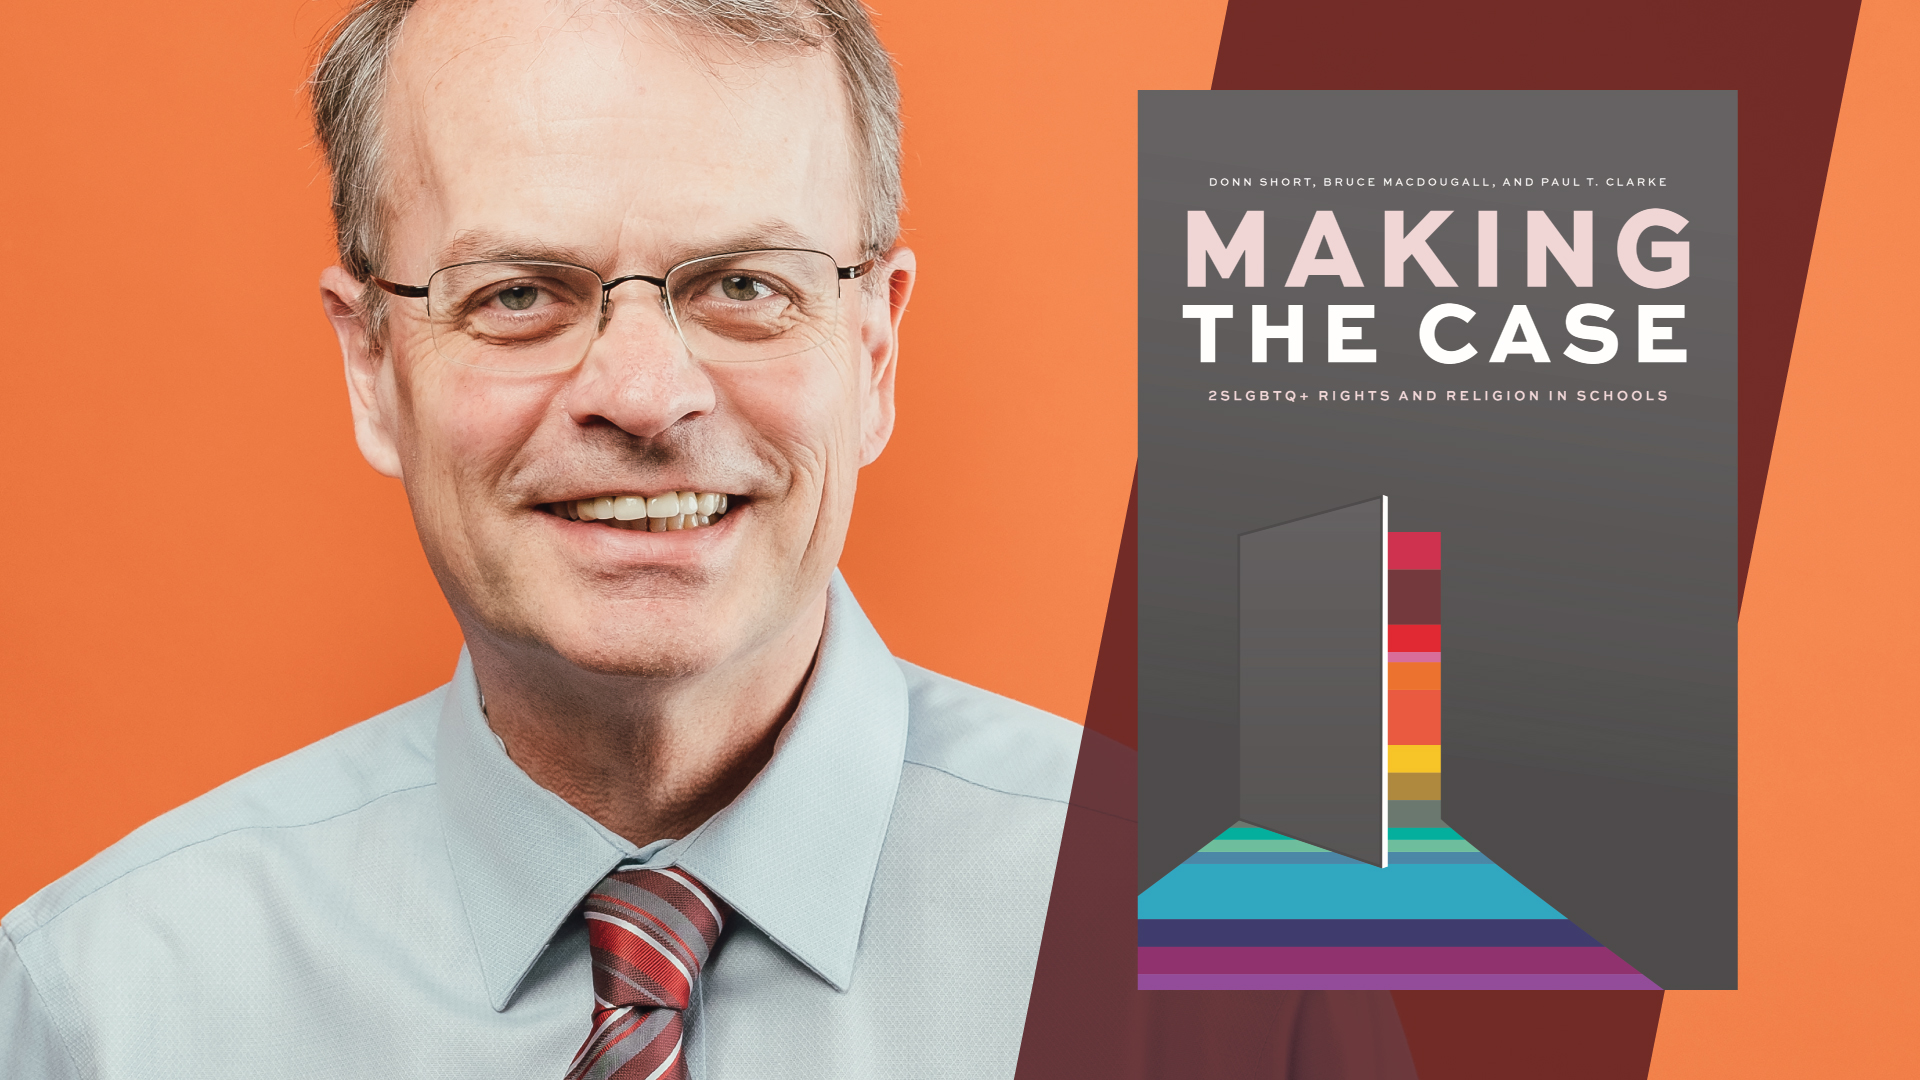 Making the Case by Donn Short, Bruce MacDougall, and Paul T. Clarke